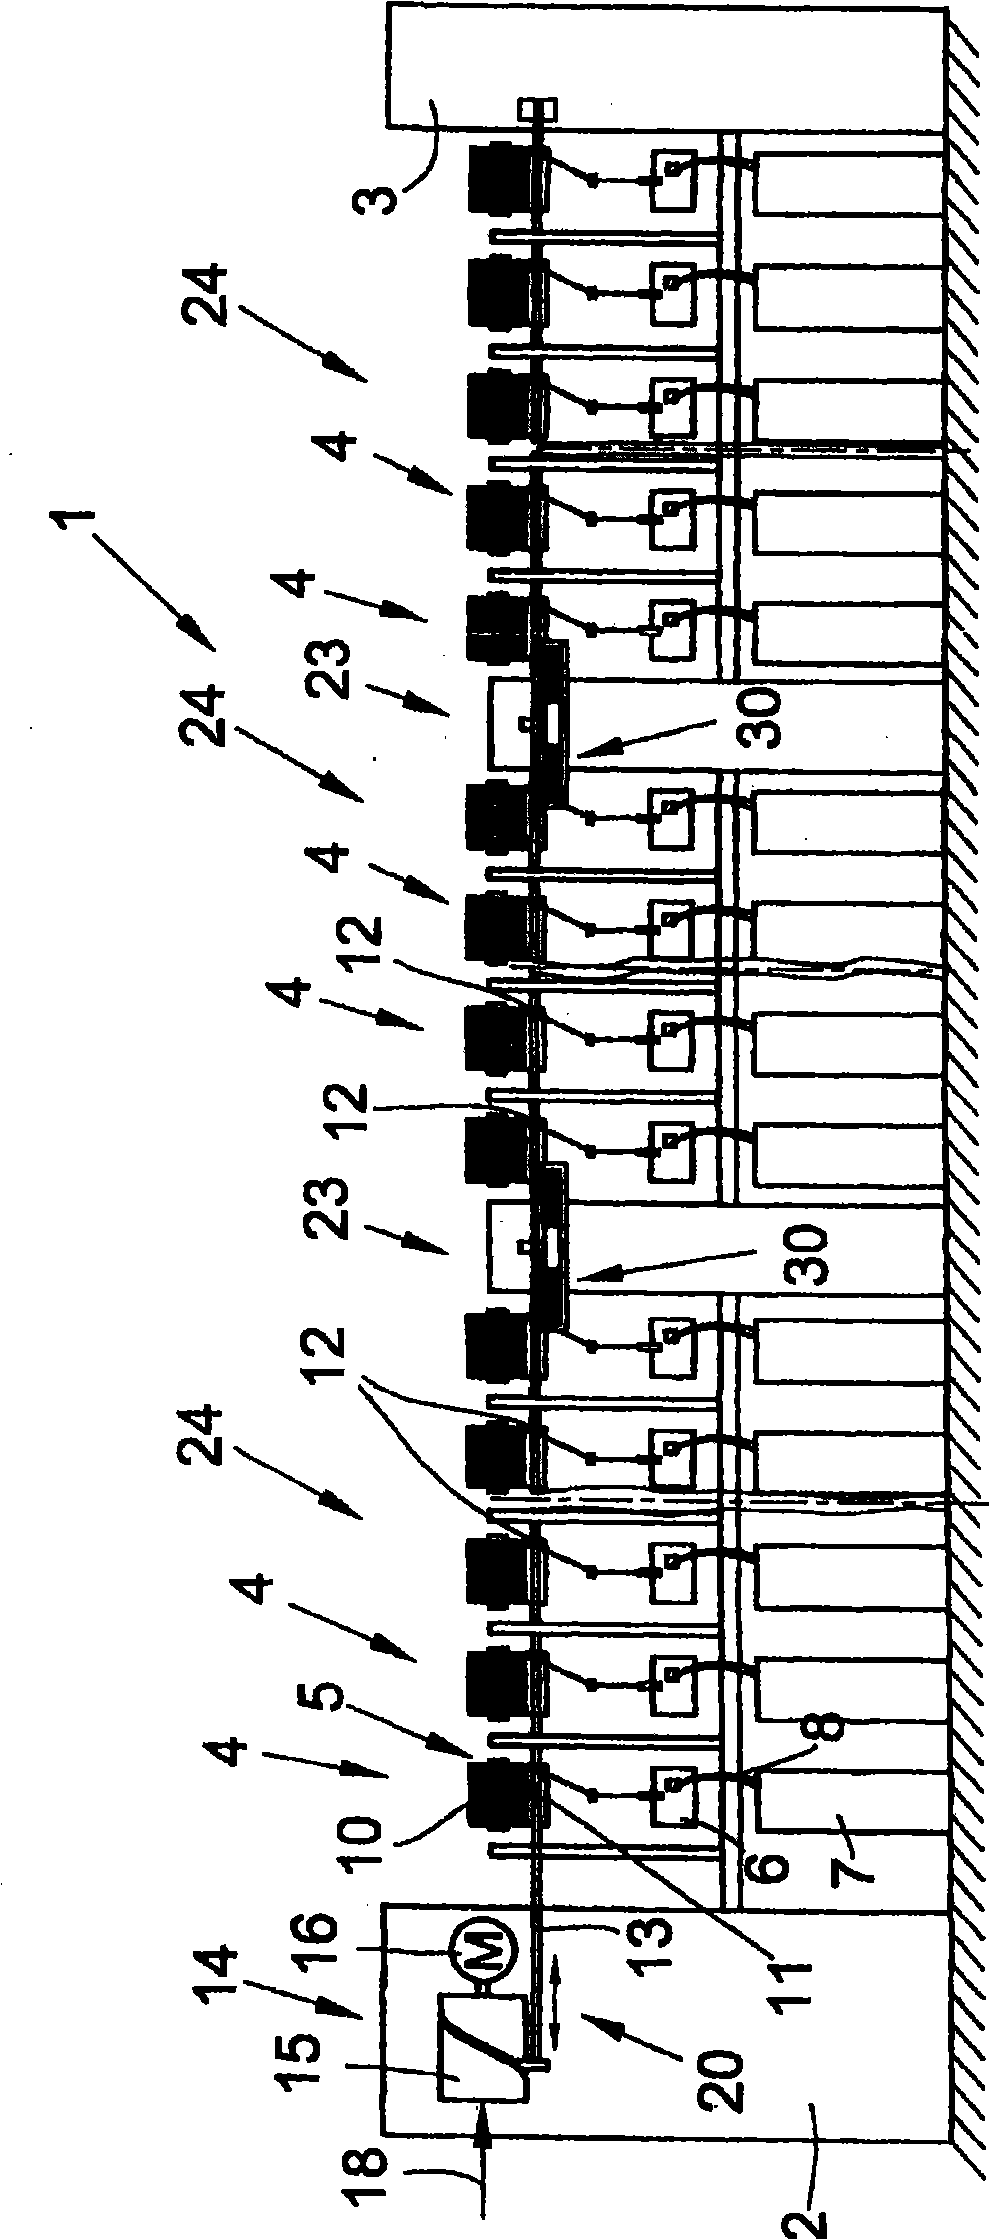 Cross-winding device for a textile machine which produces cross-wound bobbins